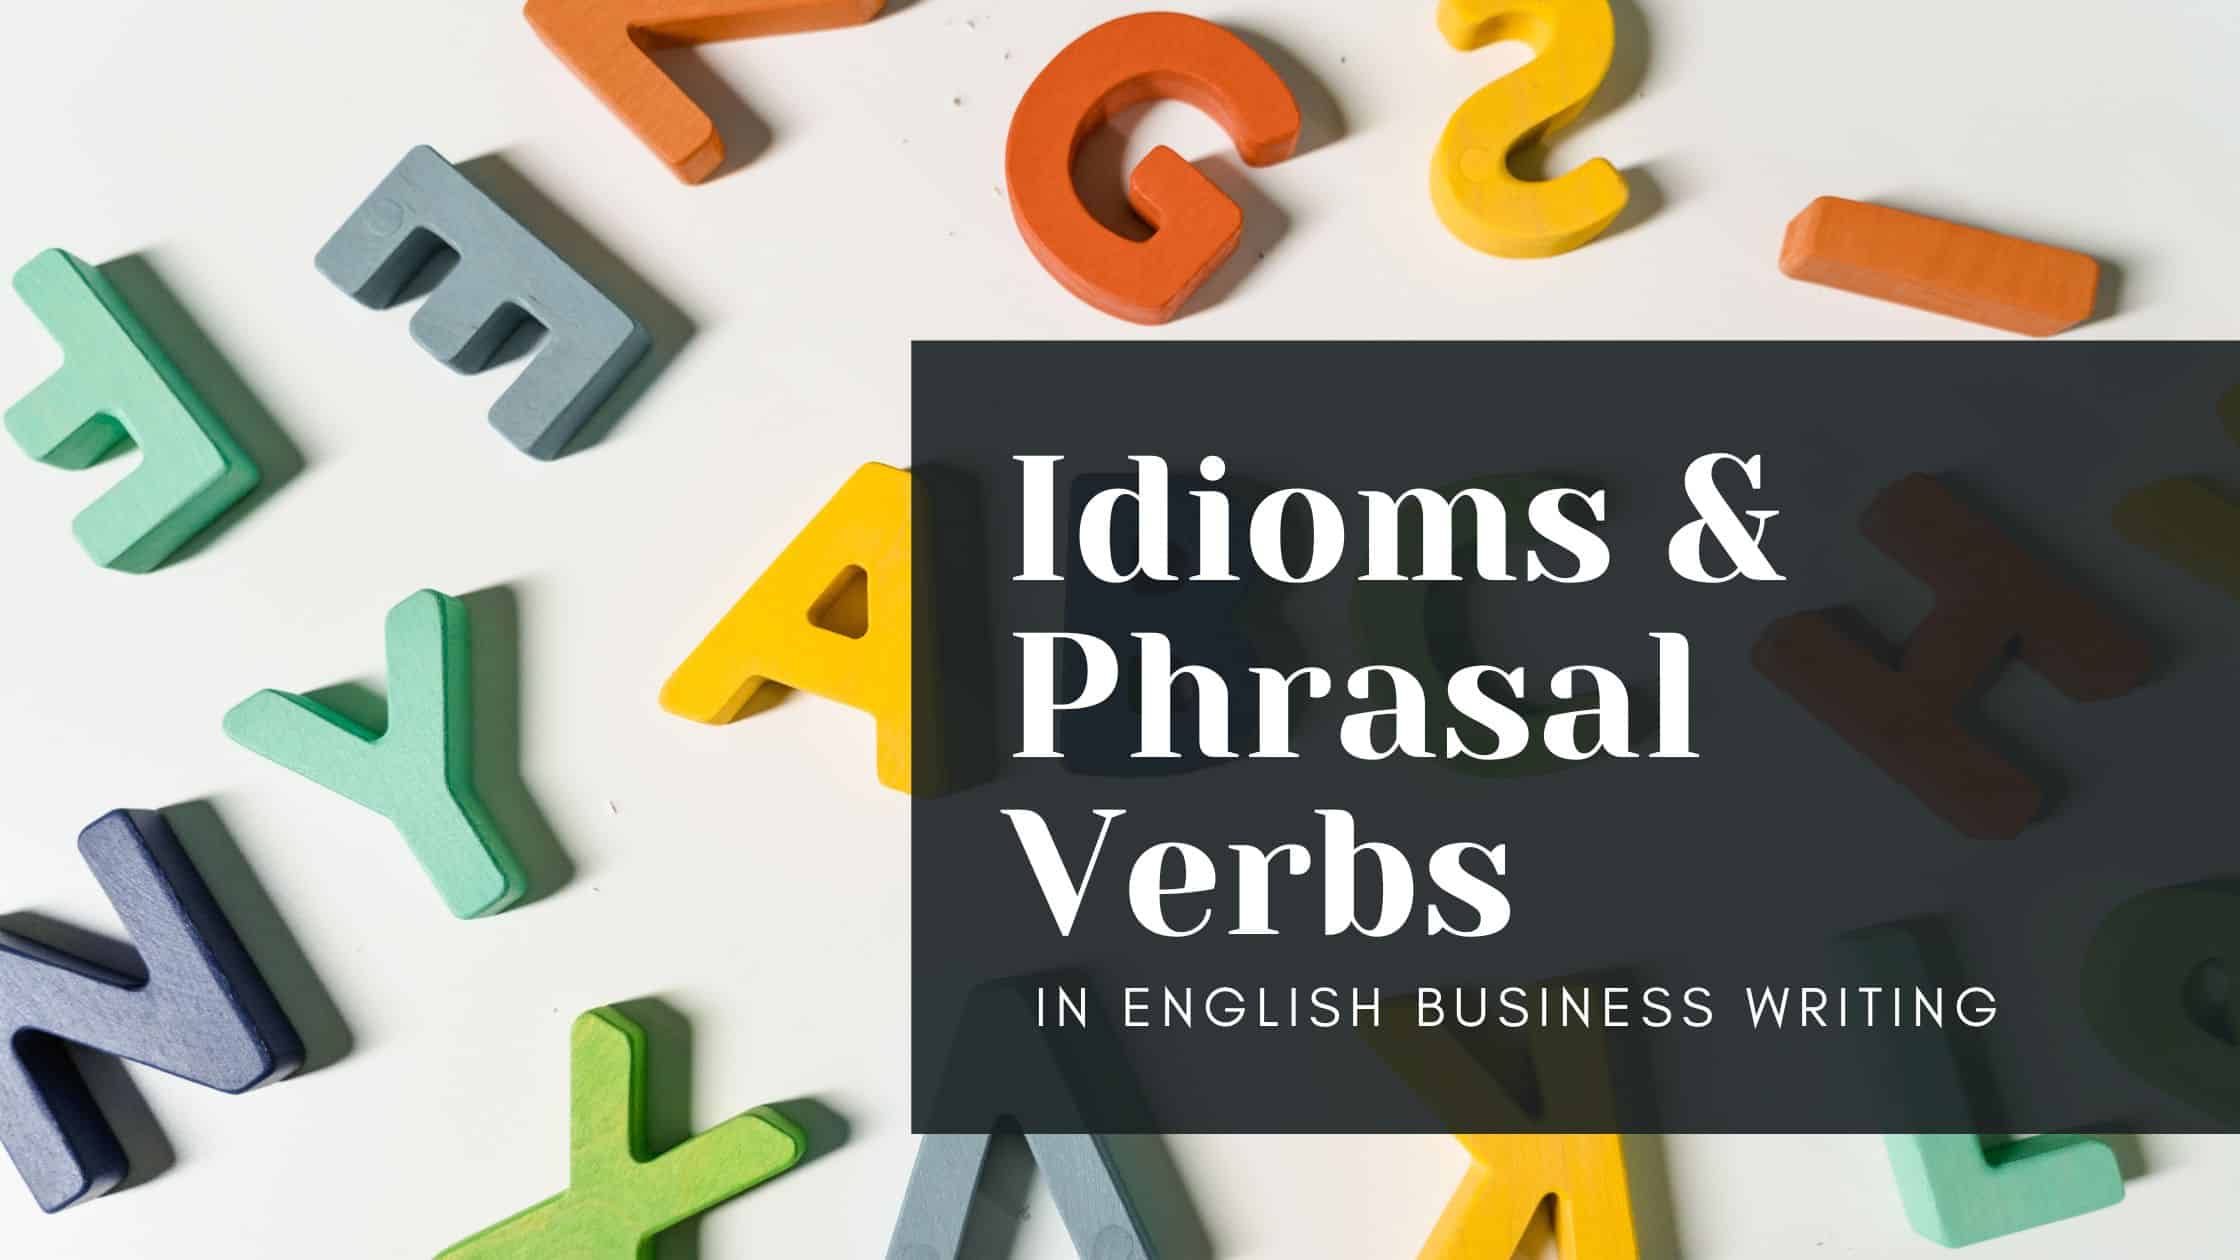 Idioms & Phrasal Verbs in English Business Writing [Common Mistakes]